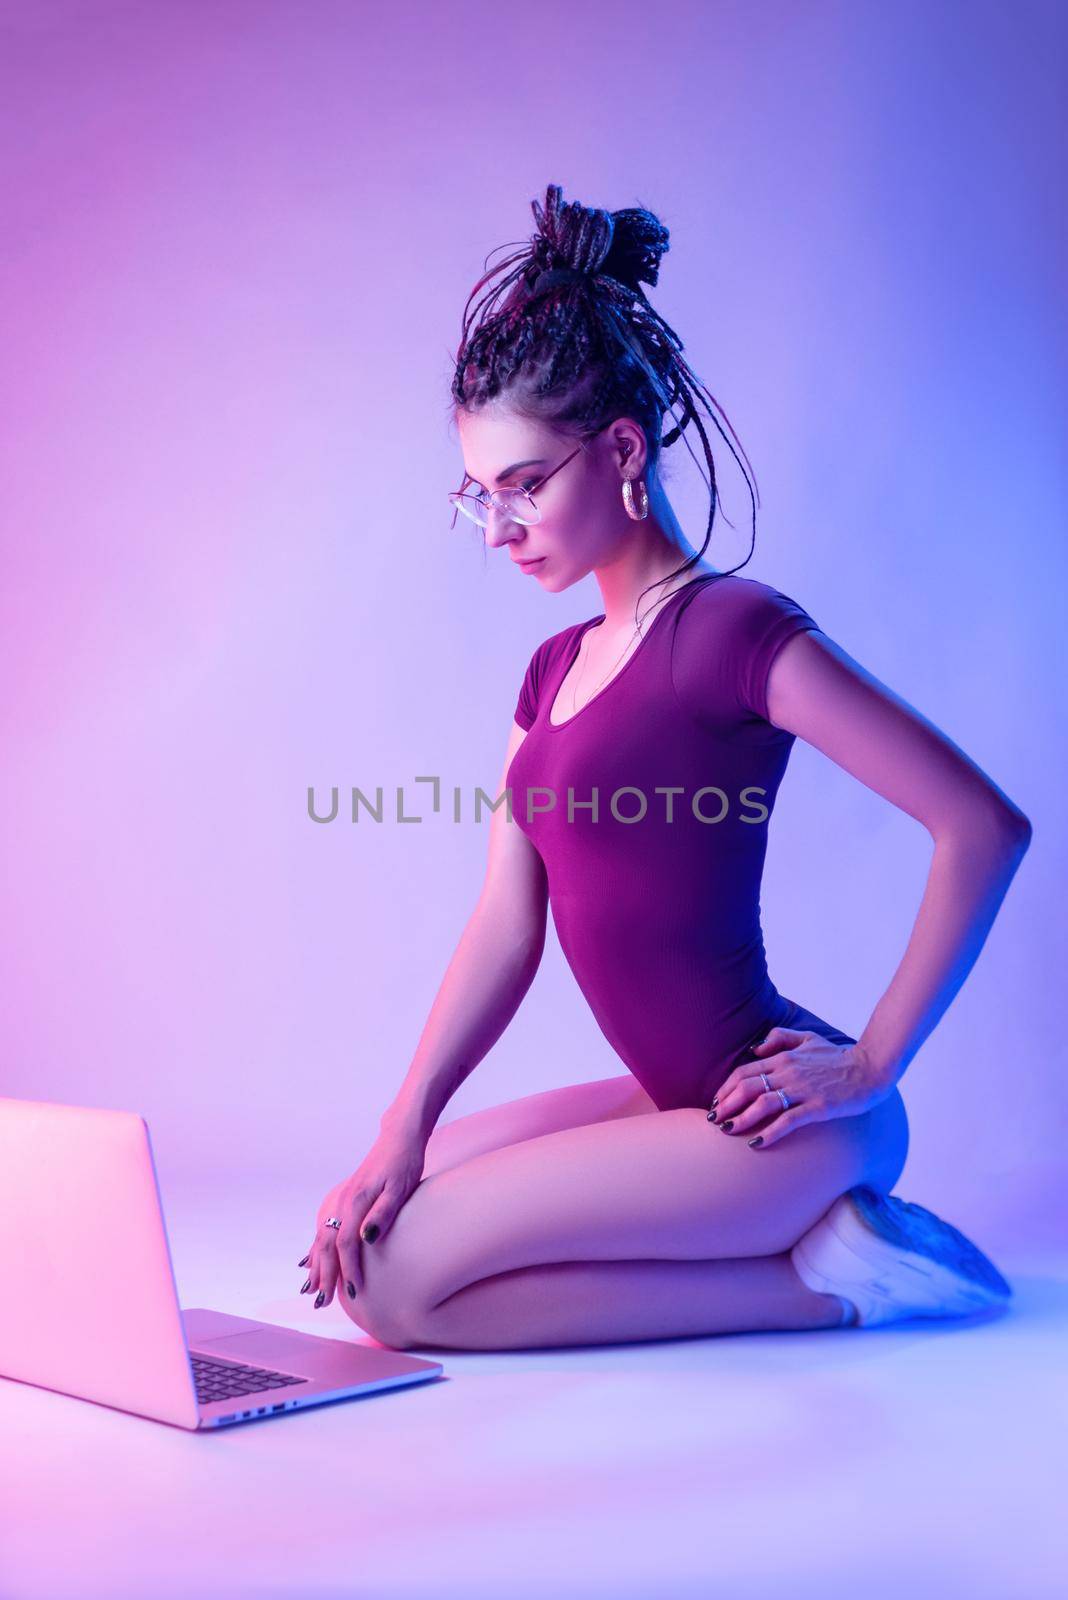 the girl dressed in a bodysuit with dreadlocks on her head is sitting on the floor on a white background